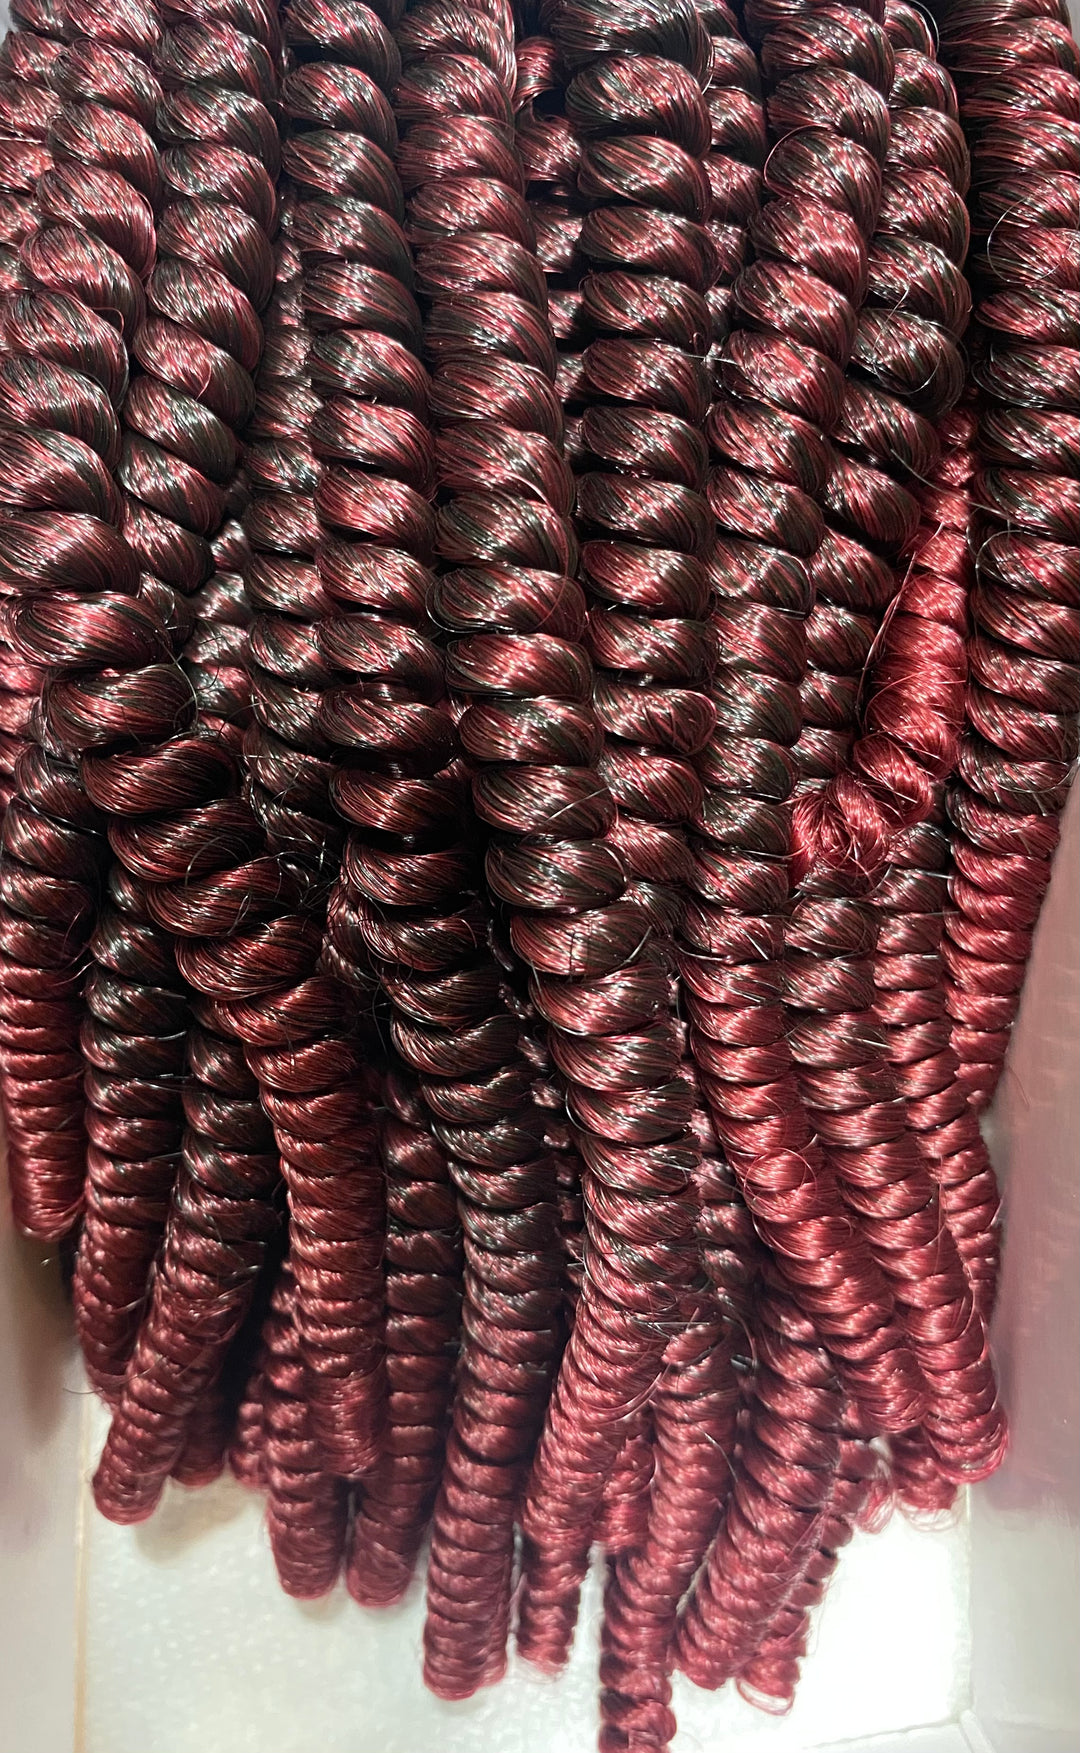 A bunch of Kadi Natural Spring Twist burgundy colored curls in a Kadi Naturals box, promoting natural hair care and skincare.